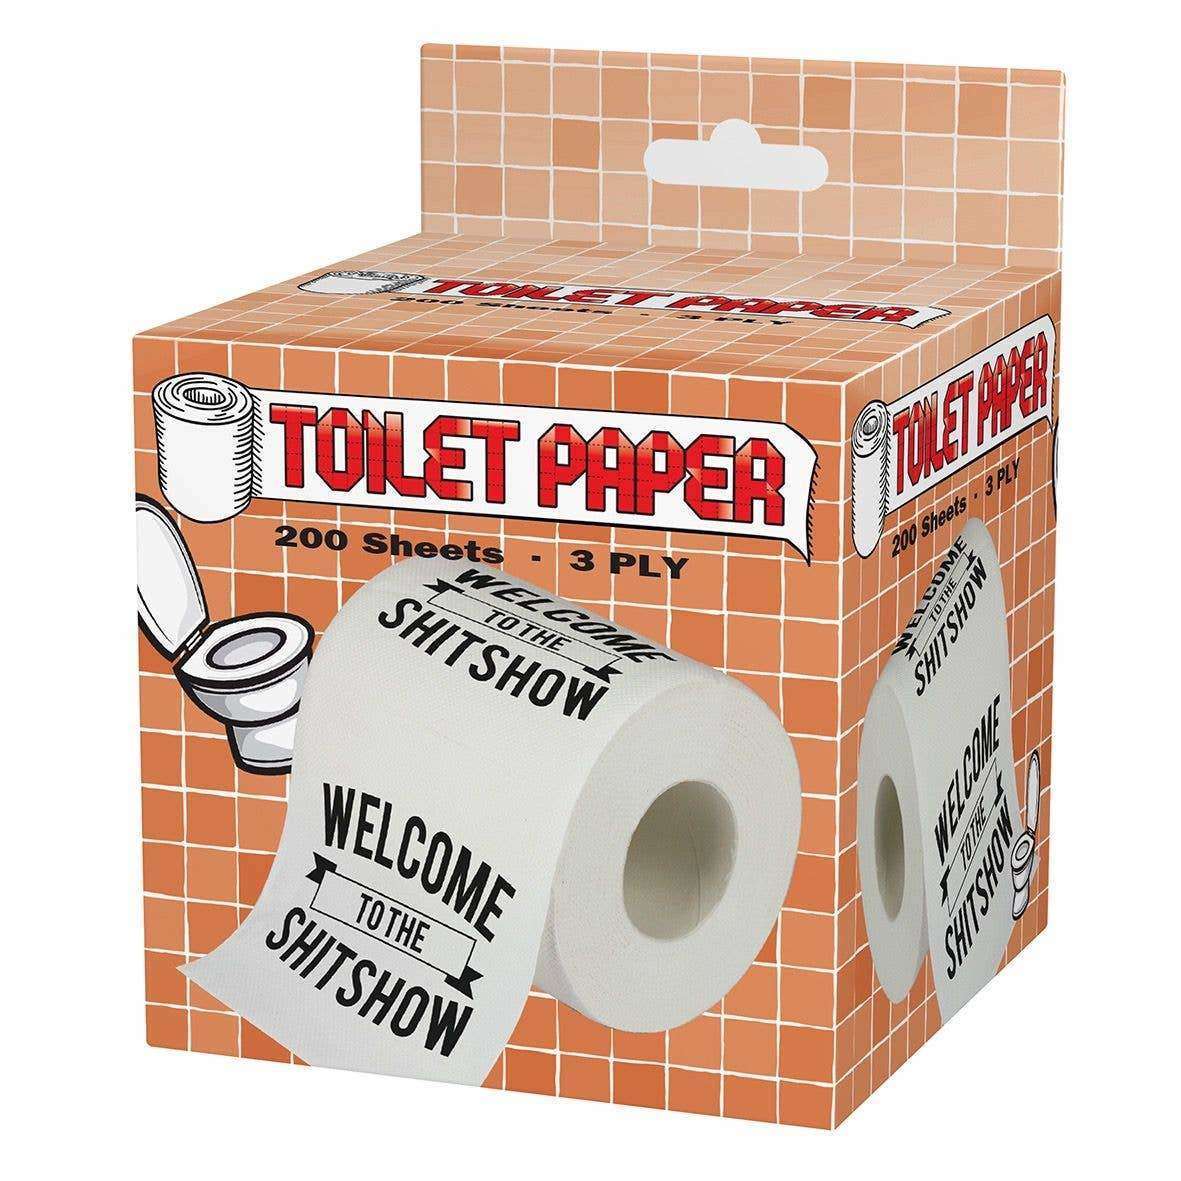 Welcome To The Shitshow Toilet Paper